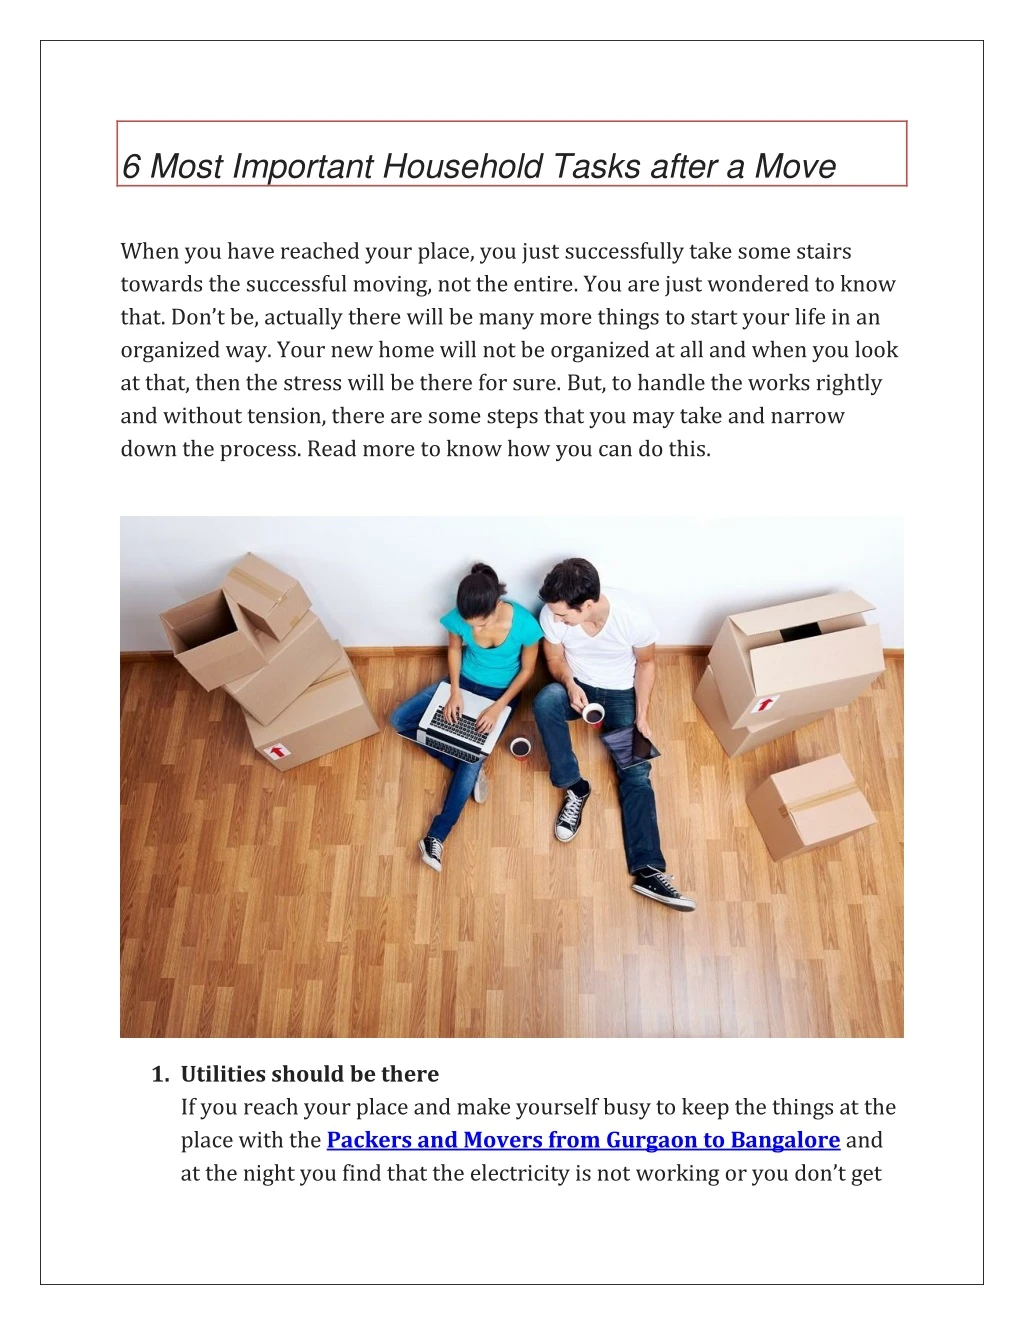 6 most important household tasks after a move